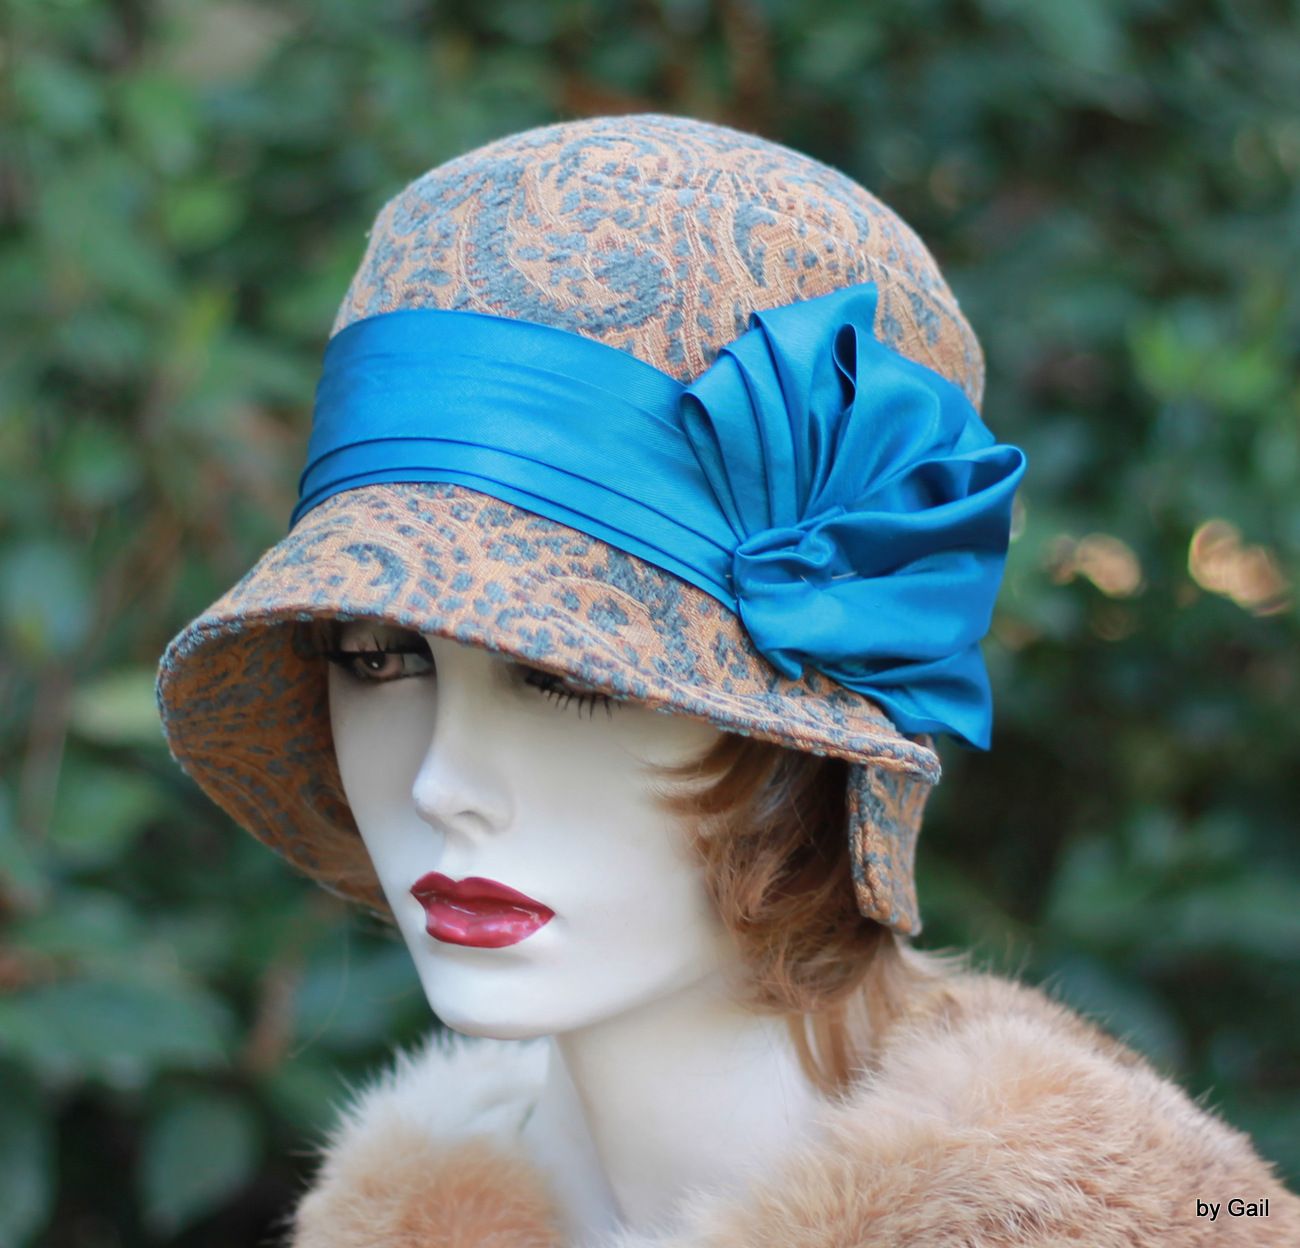 NEW Details about   DOLL HAT VINTAGE LOOK 1920'S GATSBY CLOCHE 